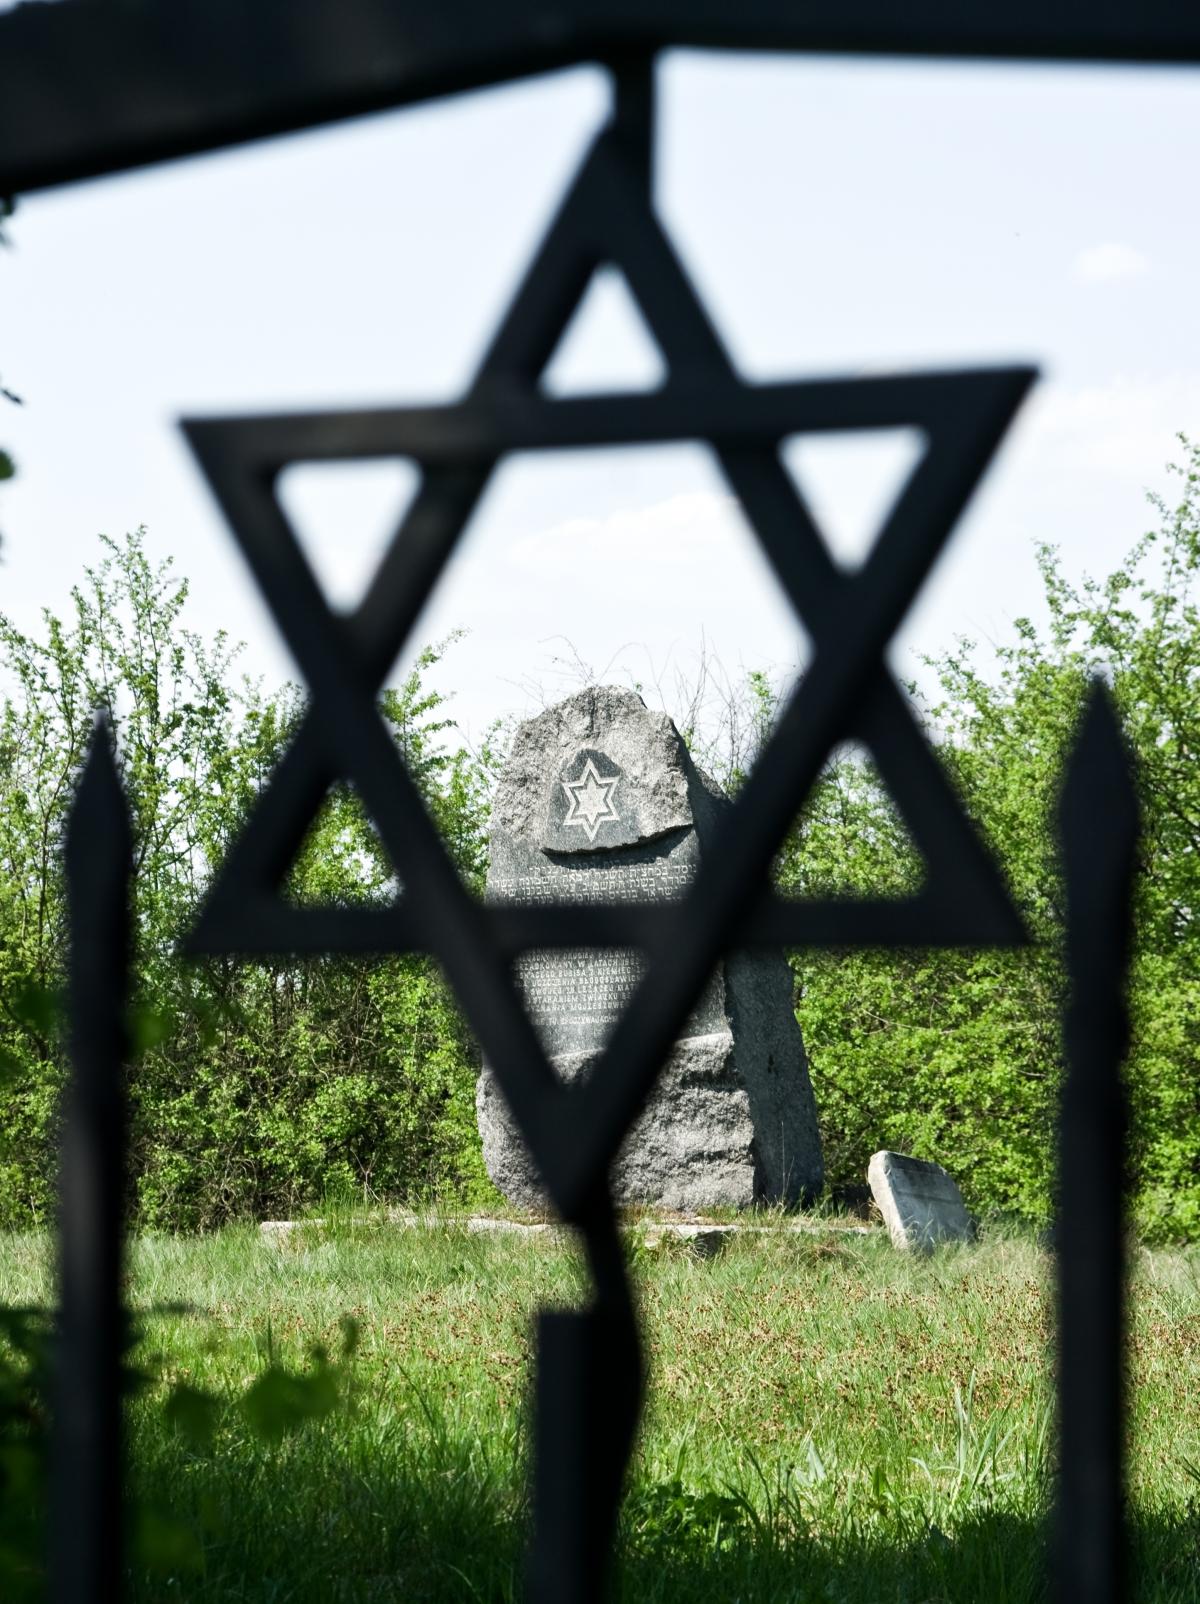 Wikipedia, Jewish cemetery in Bobrowniki, Media with locations, Pages with maps, Self-published work